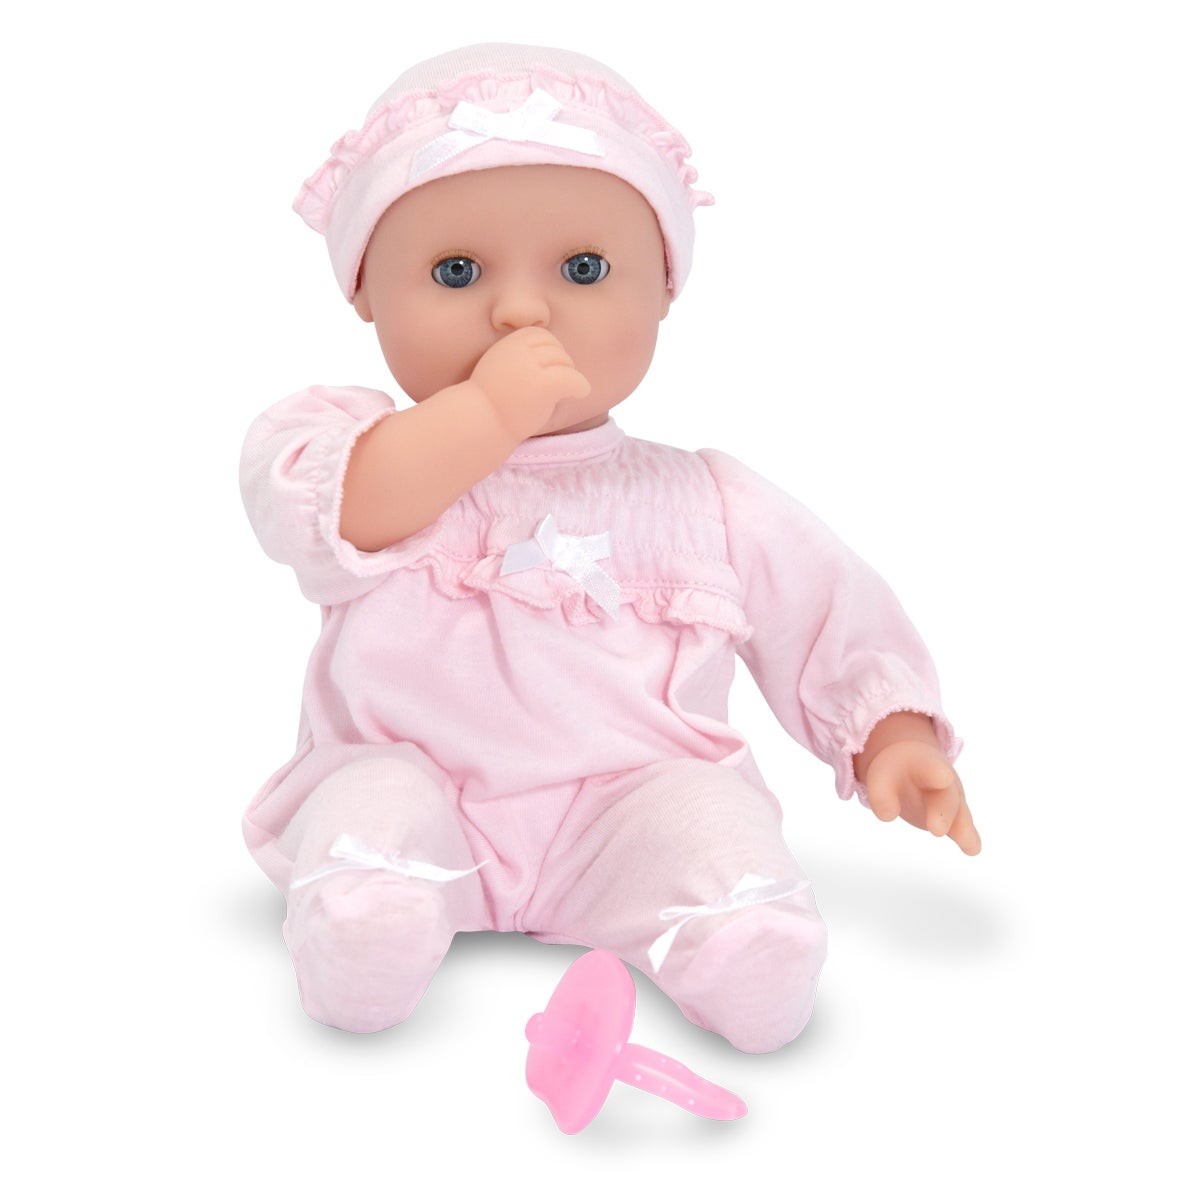 12" Jenna Baby Doll Ages 18+ Months